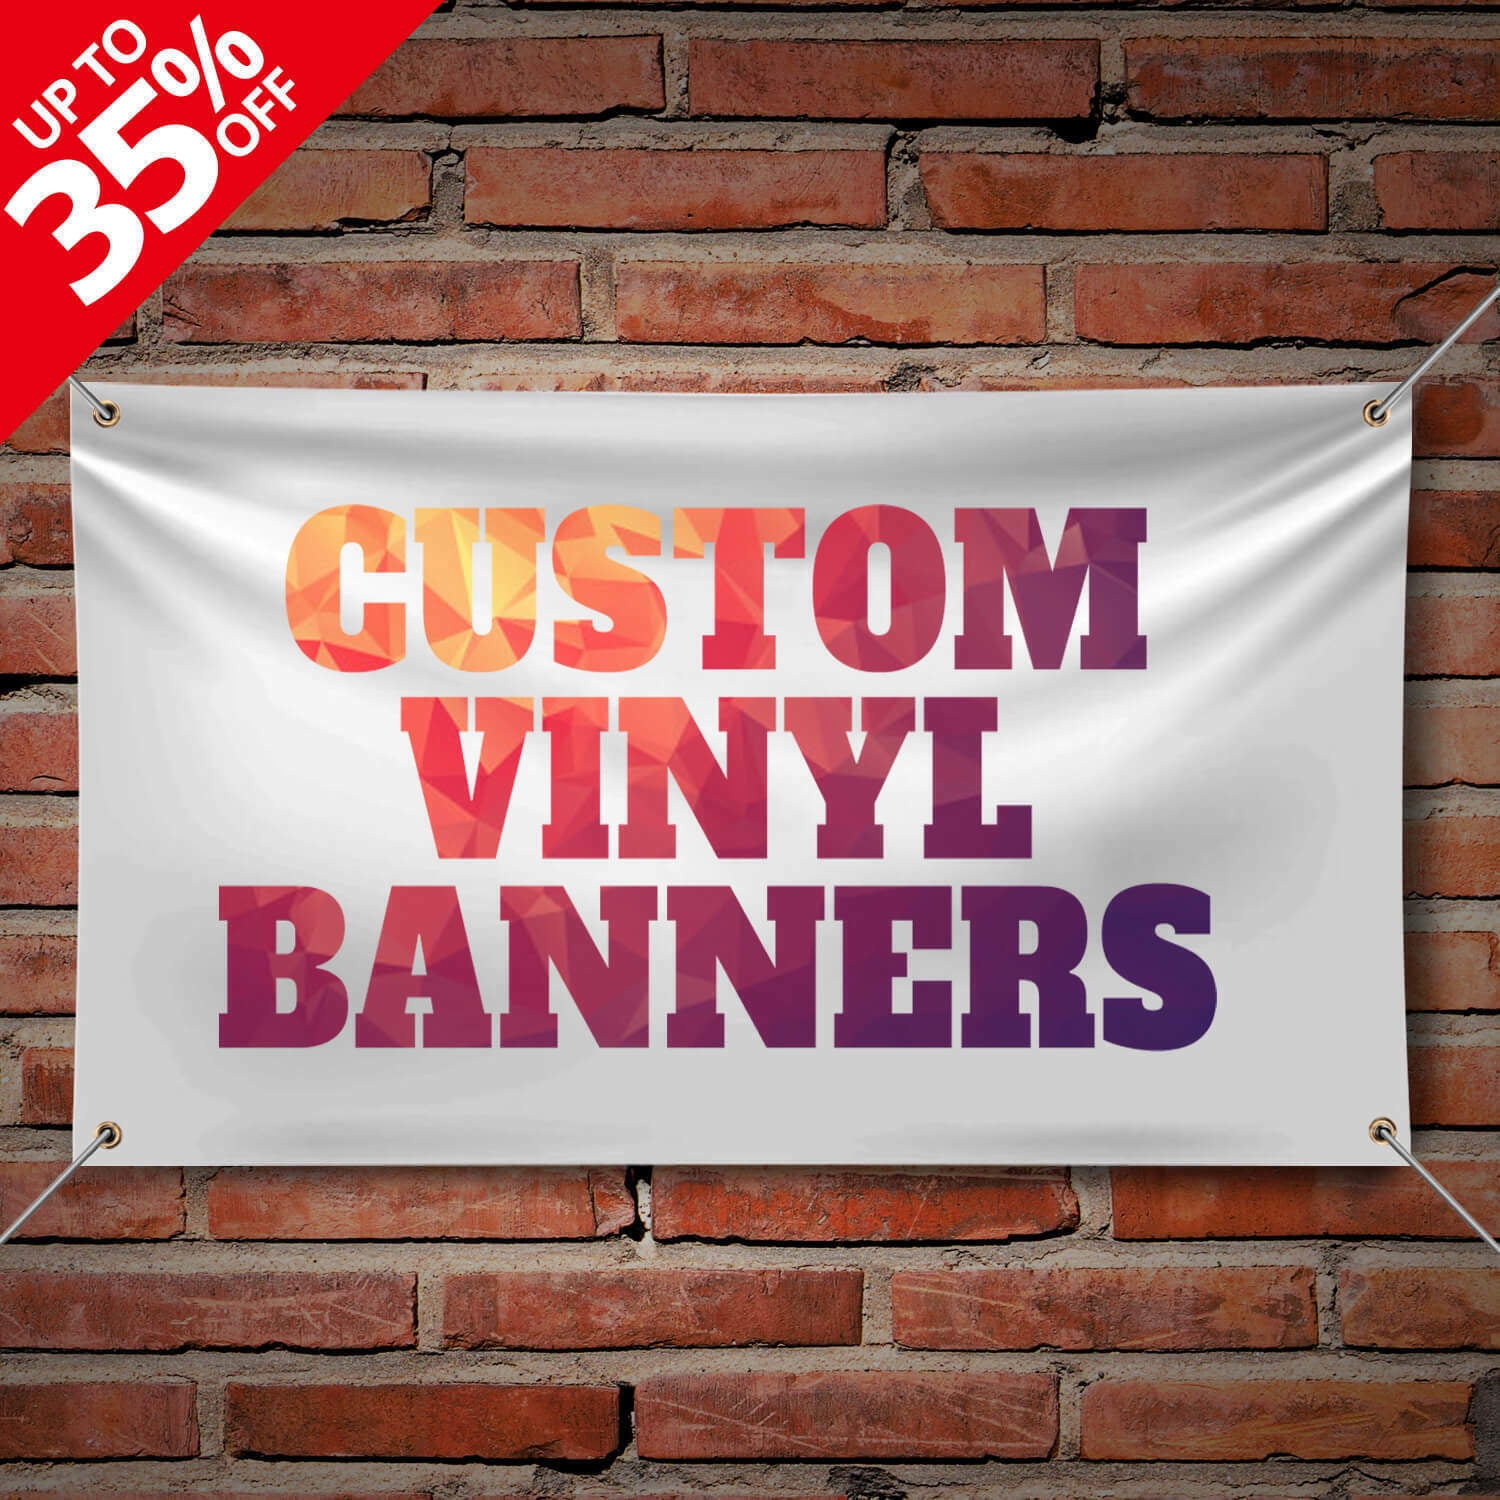 We Are Moving Business Vinyl Banner Sign W/ Grommets 